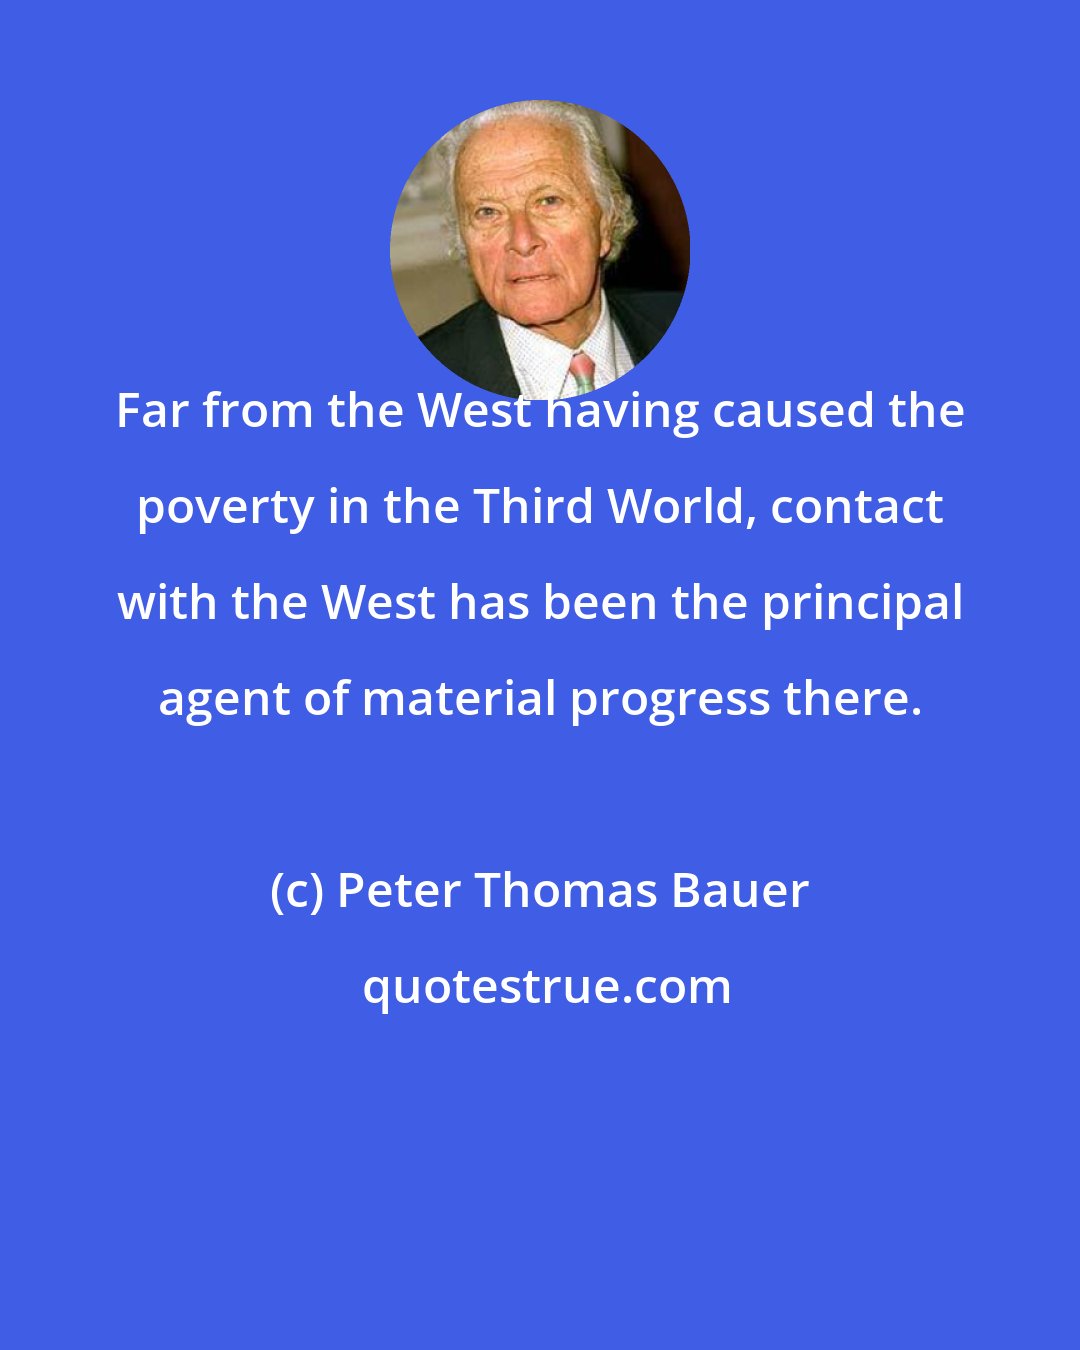 Peter Thomas Bauer: Far from the West having caused the poverty in the Third World, contact with the West has been the principal agent of material progress there.